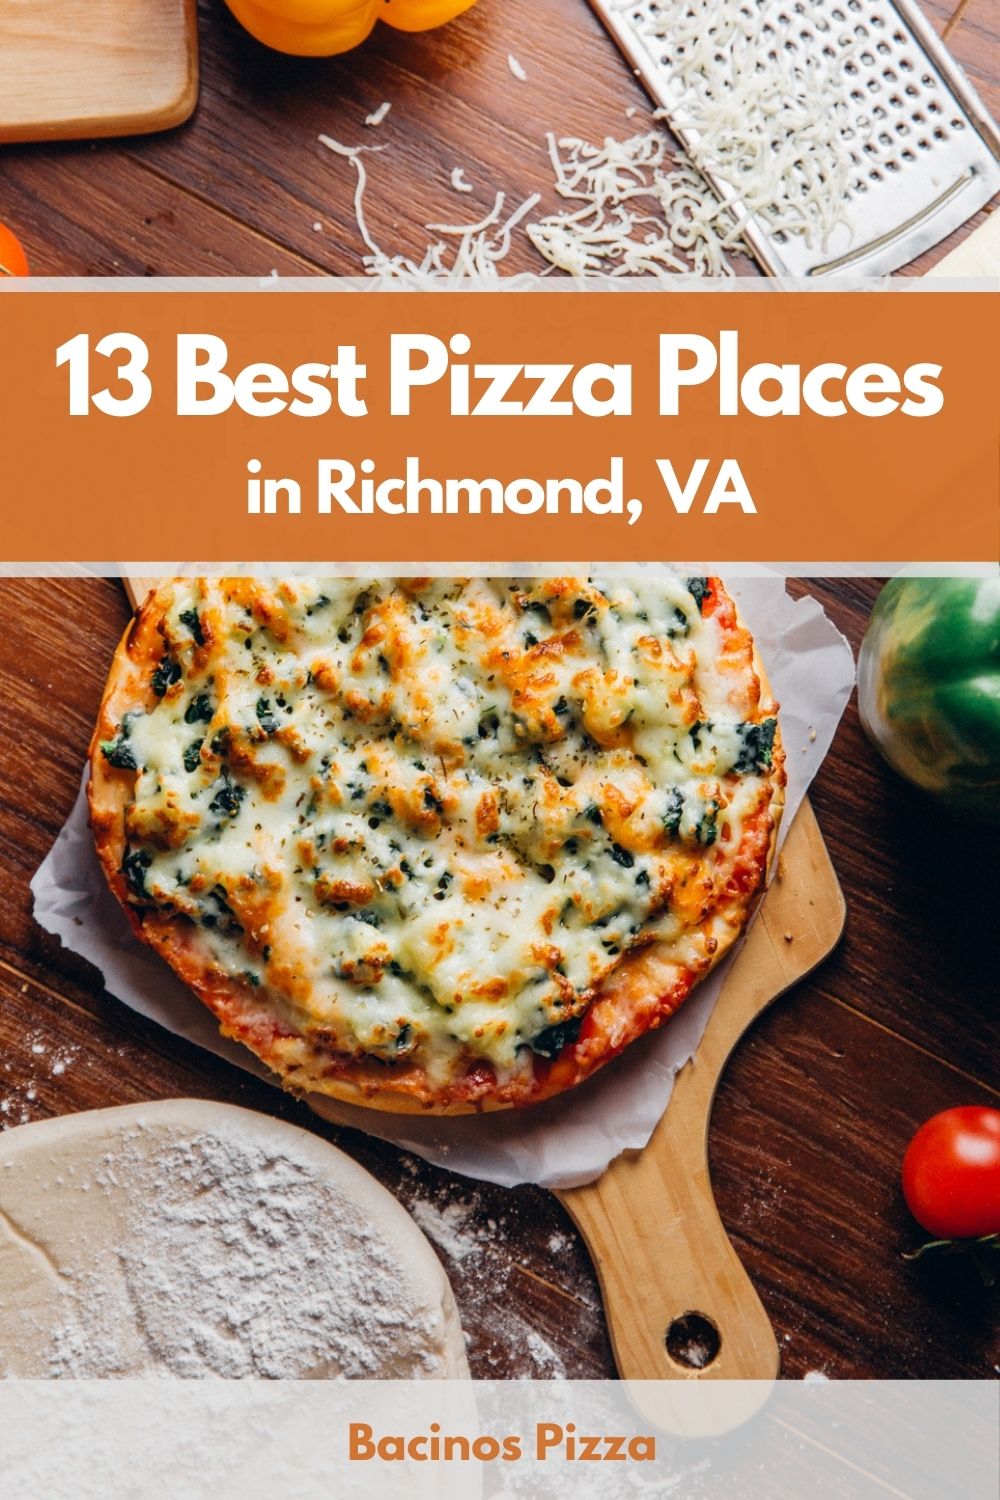 13 Best Pizza Places in Richmond, VA pin 2